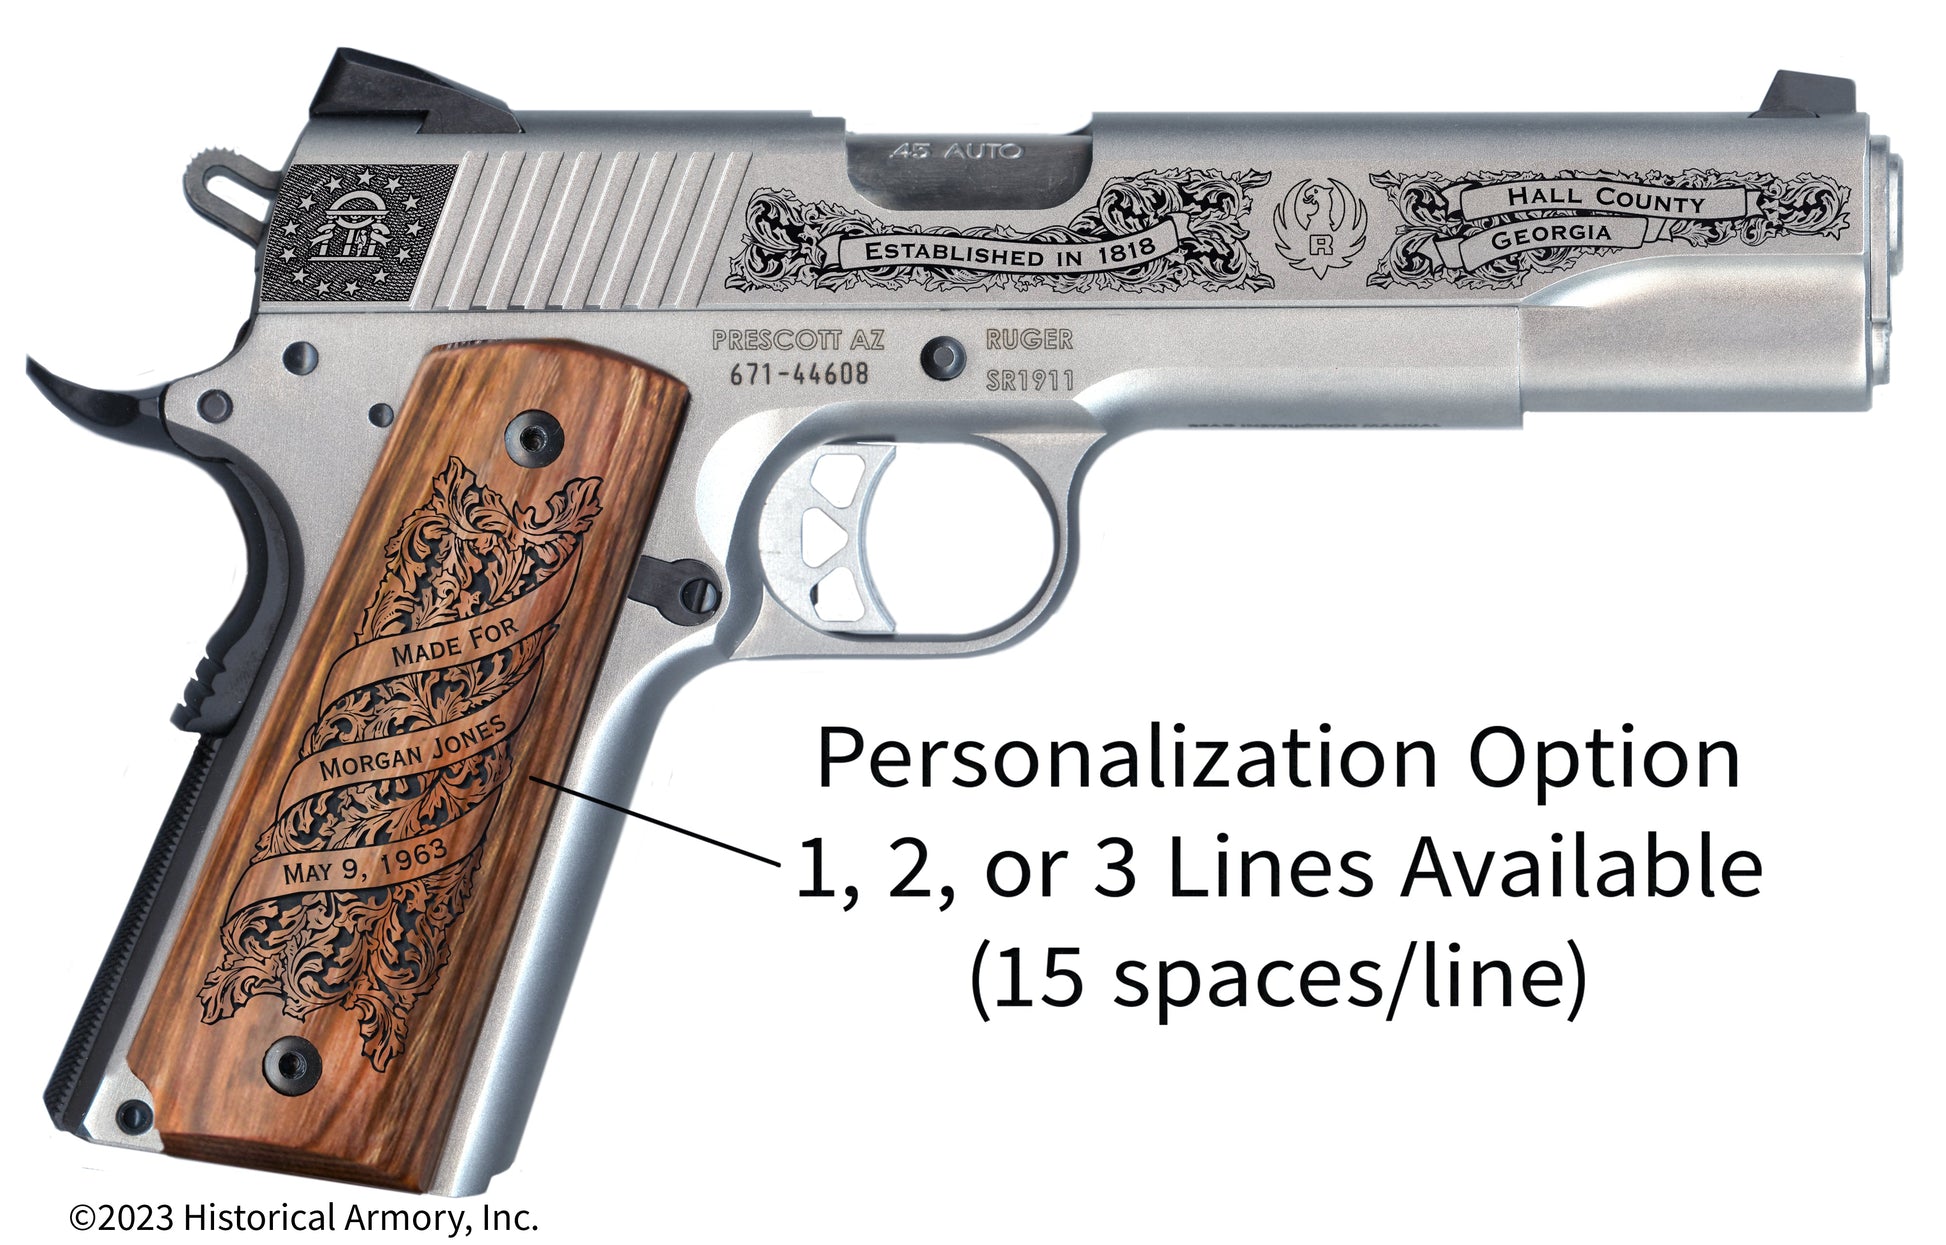 Hall County Georgia Personalized Engraved .45 Auto Ruger 1911